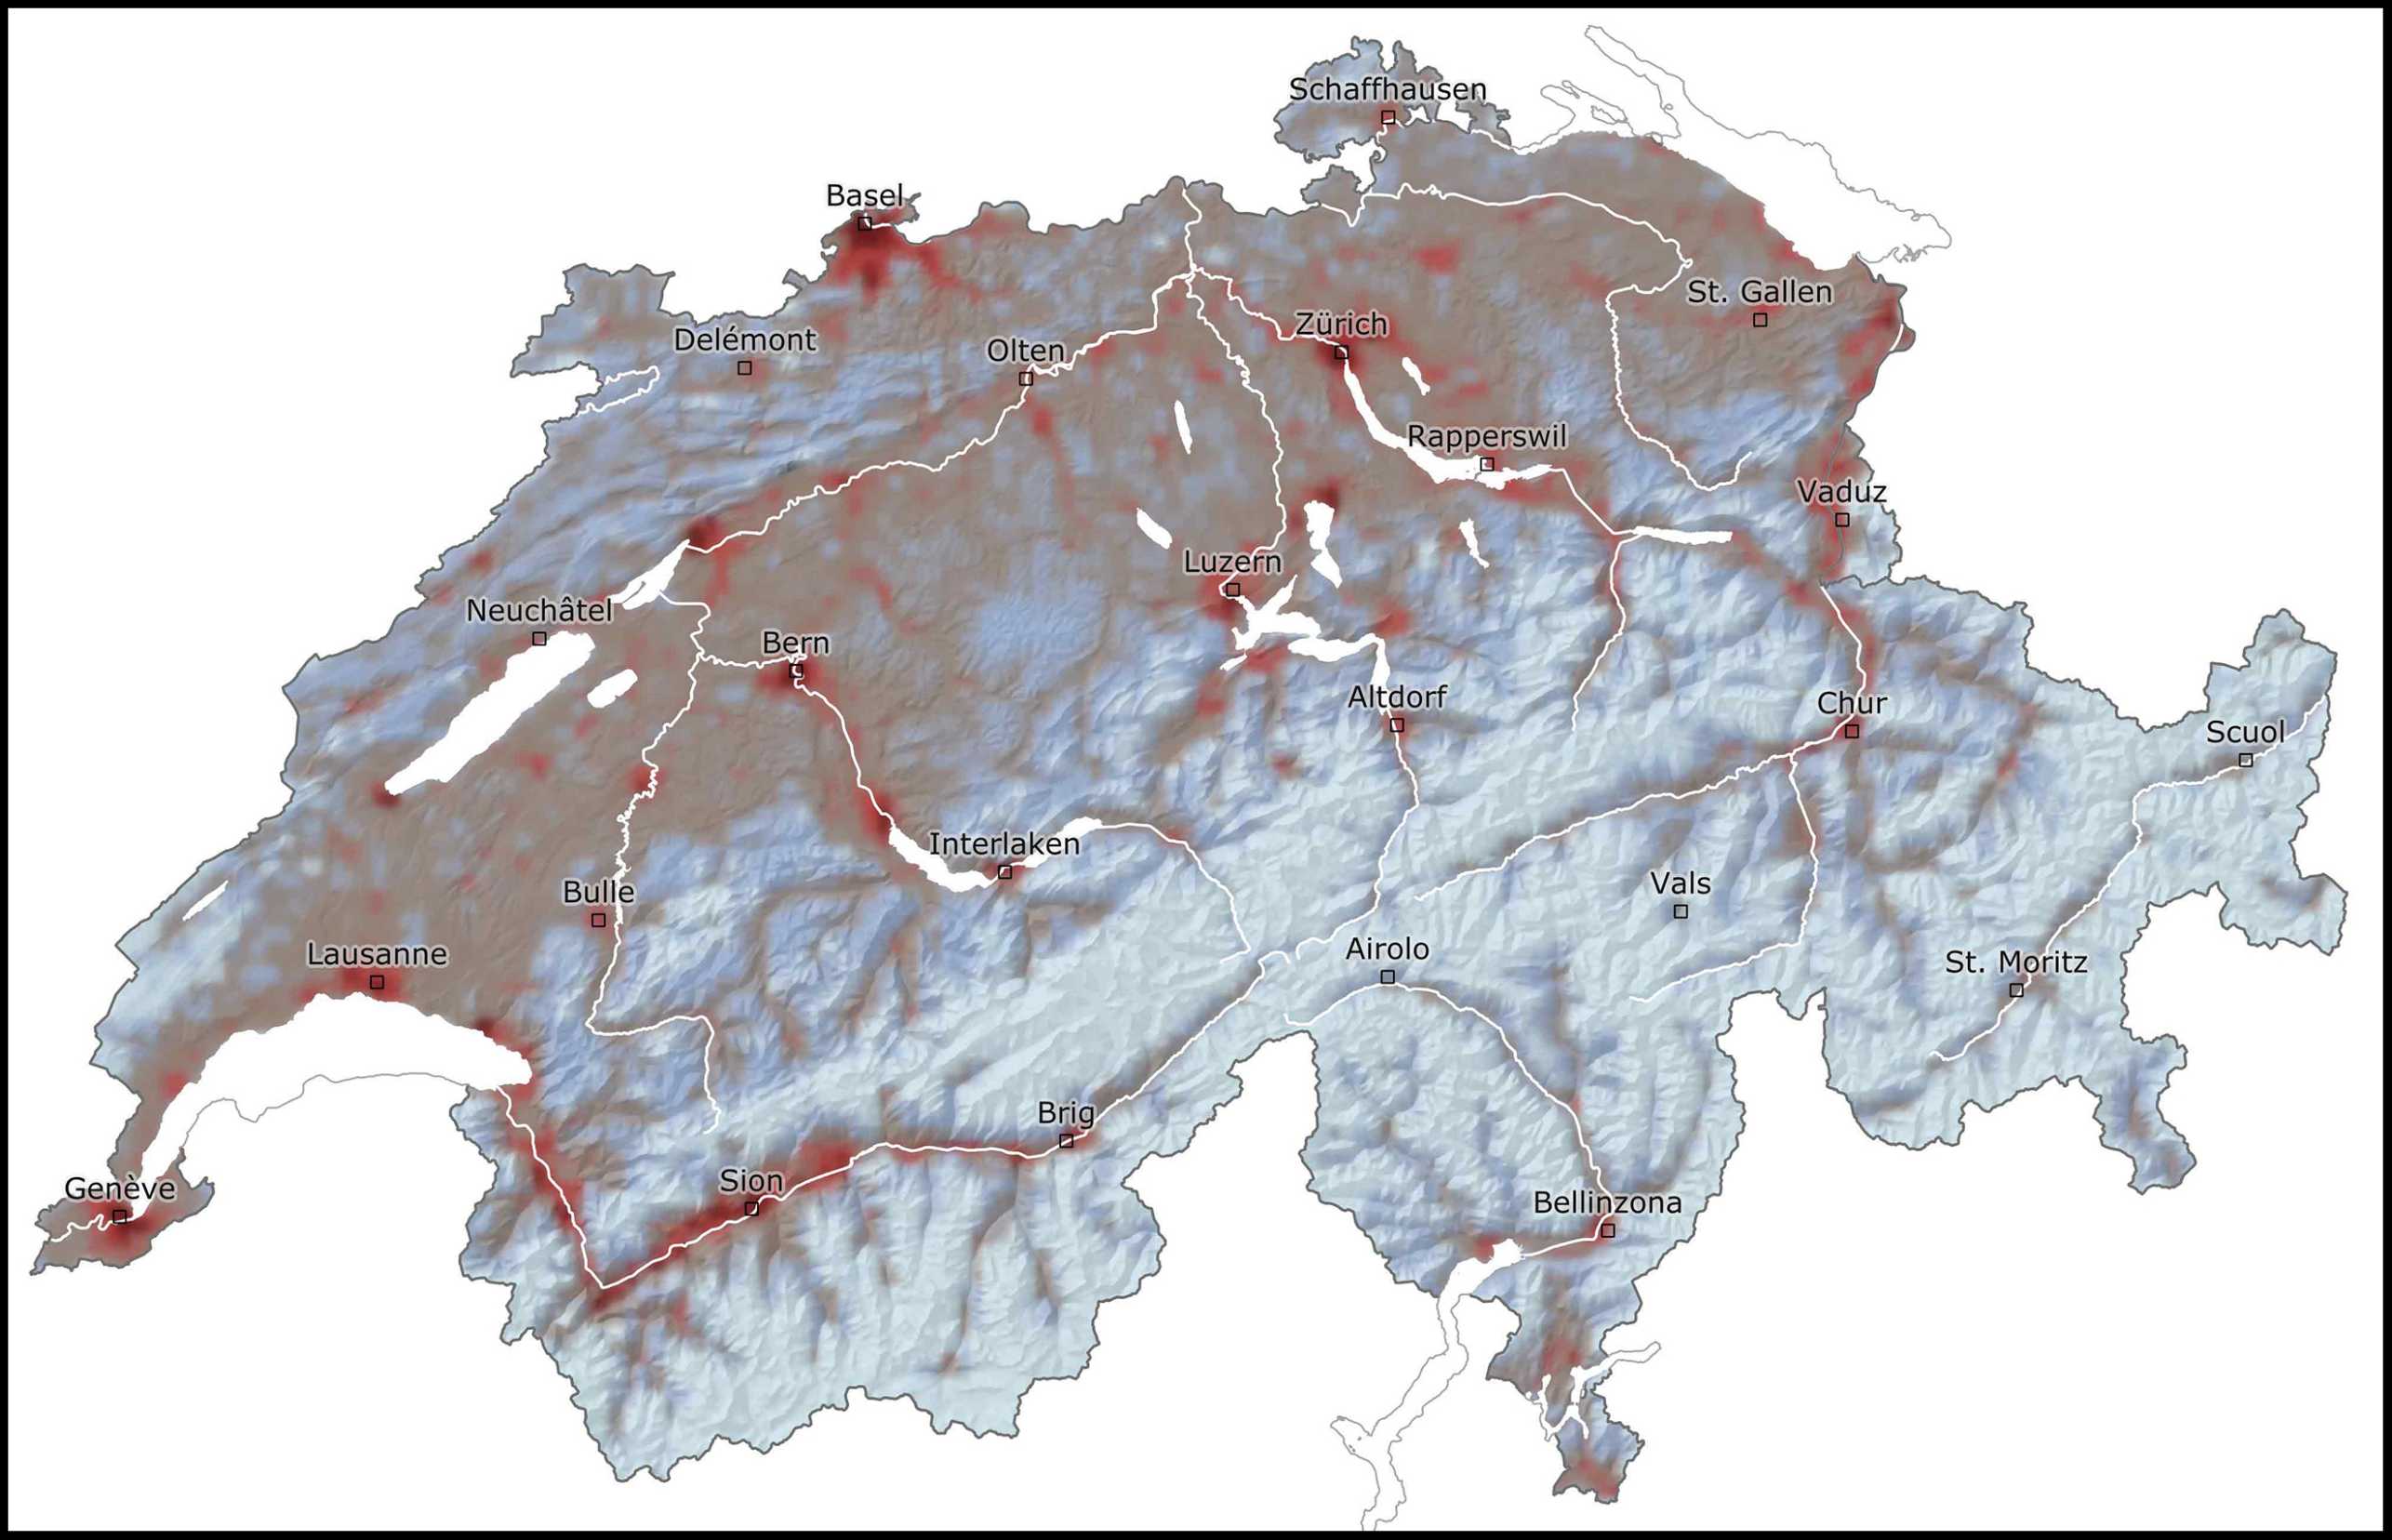 Enlarged view: risk map of Switzerland. Areas with high risk are colored red, areas with low risk are colored light blue.